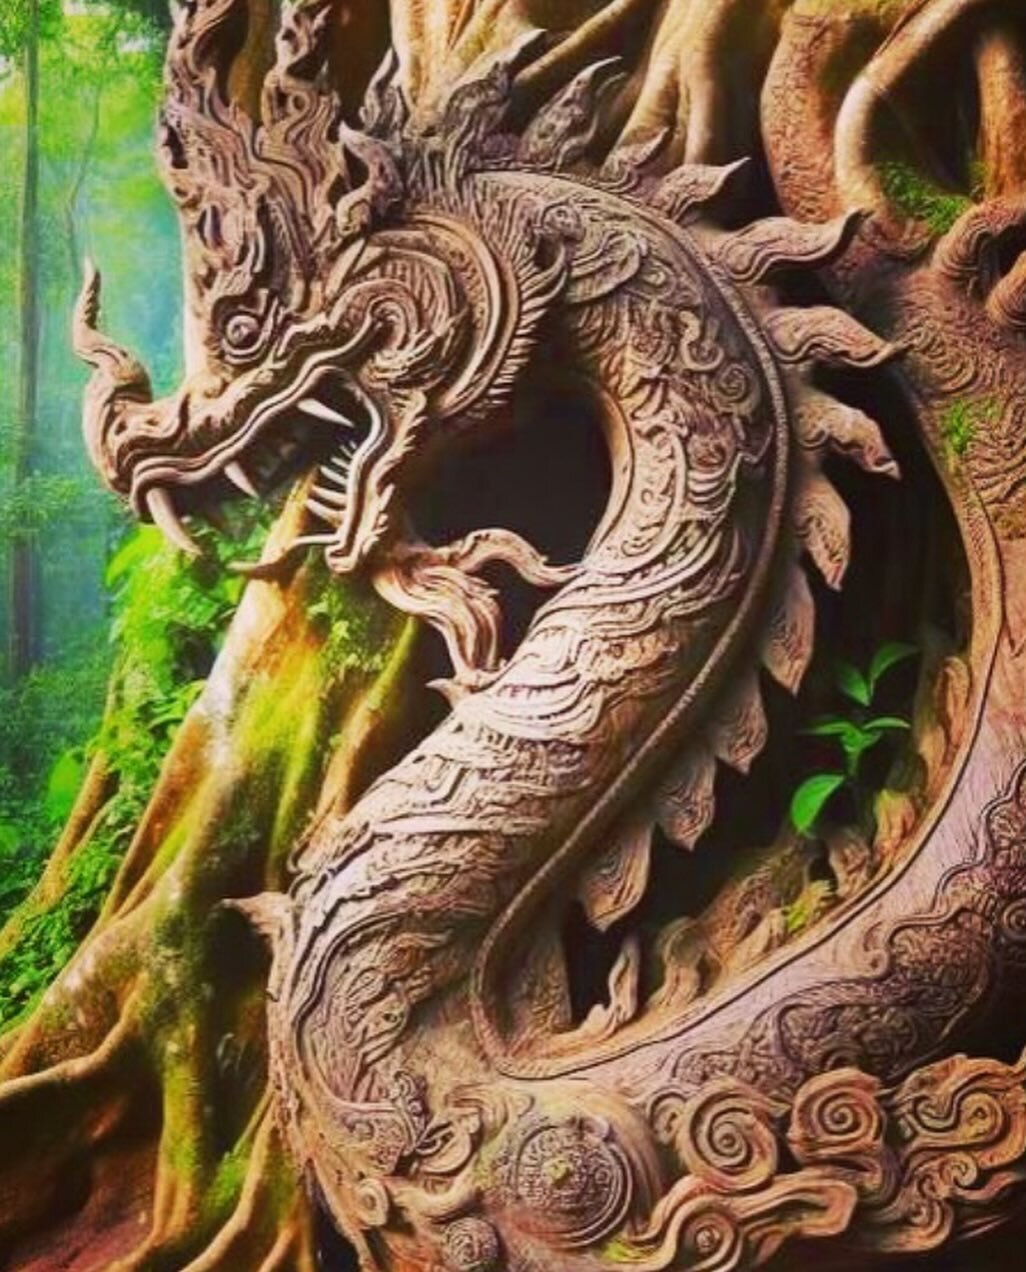 Happy 2024 Chinese New Year of the Wood Dragon! 🐲🐉🐉🐉

Astrologers predict this to be a year of rebirth, abundance, rejuvenation &amp; transformation. 

The wood element means we will be more adaptable and flexible in daily life and our goals.